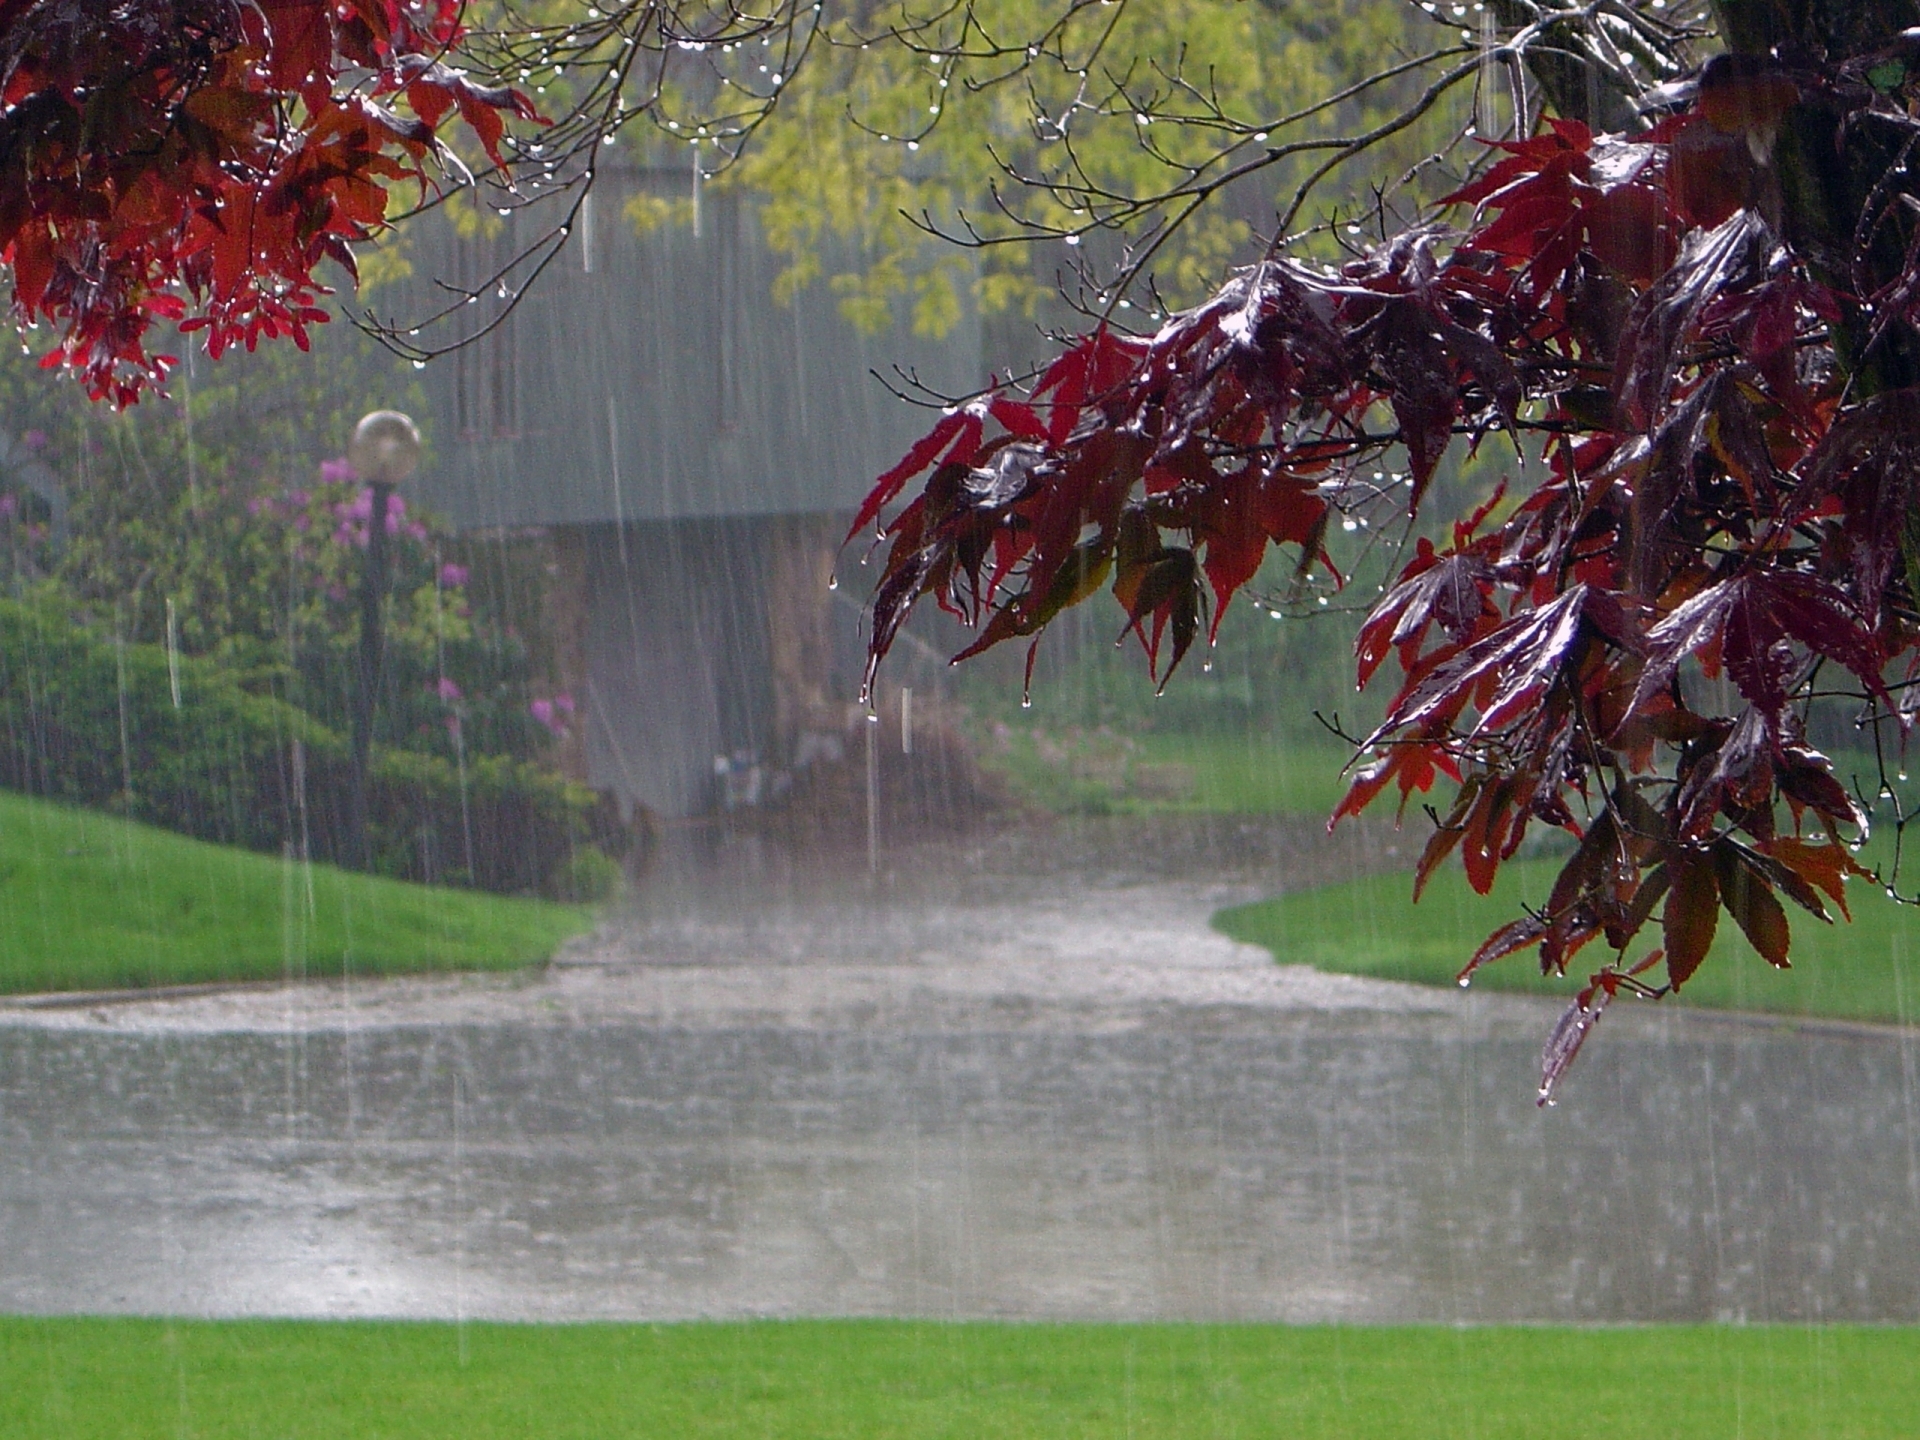 Photography of a rainy fall day